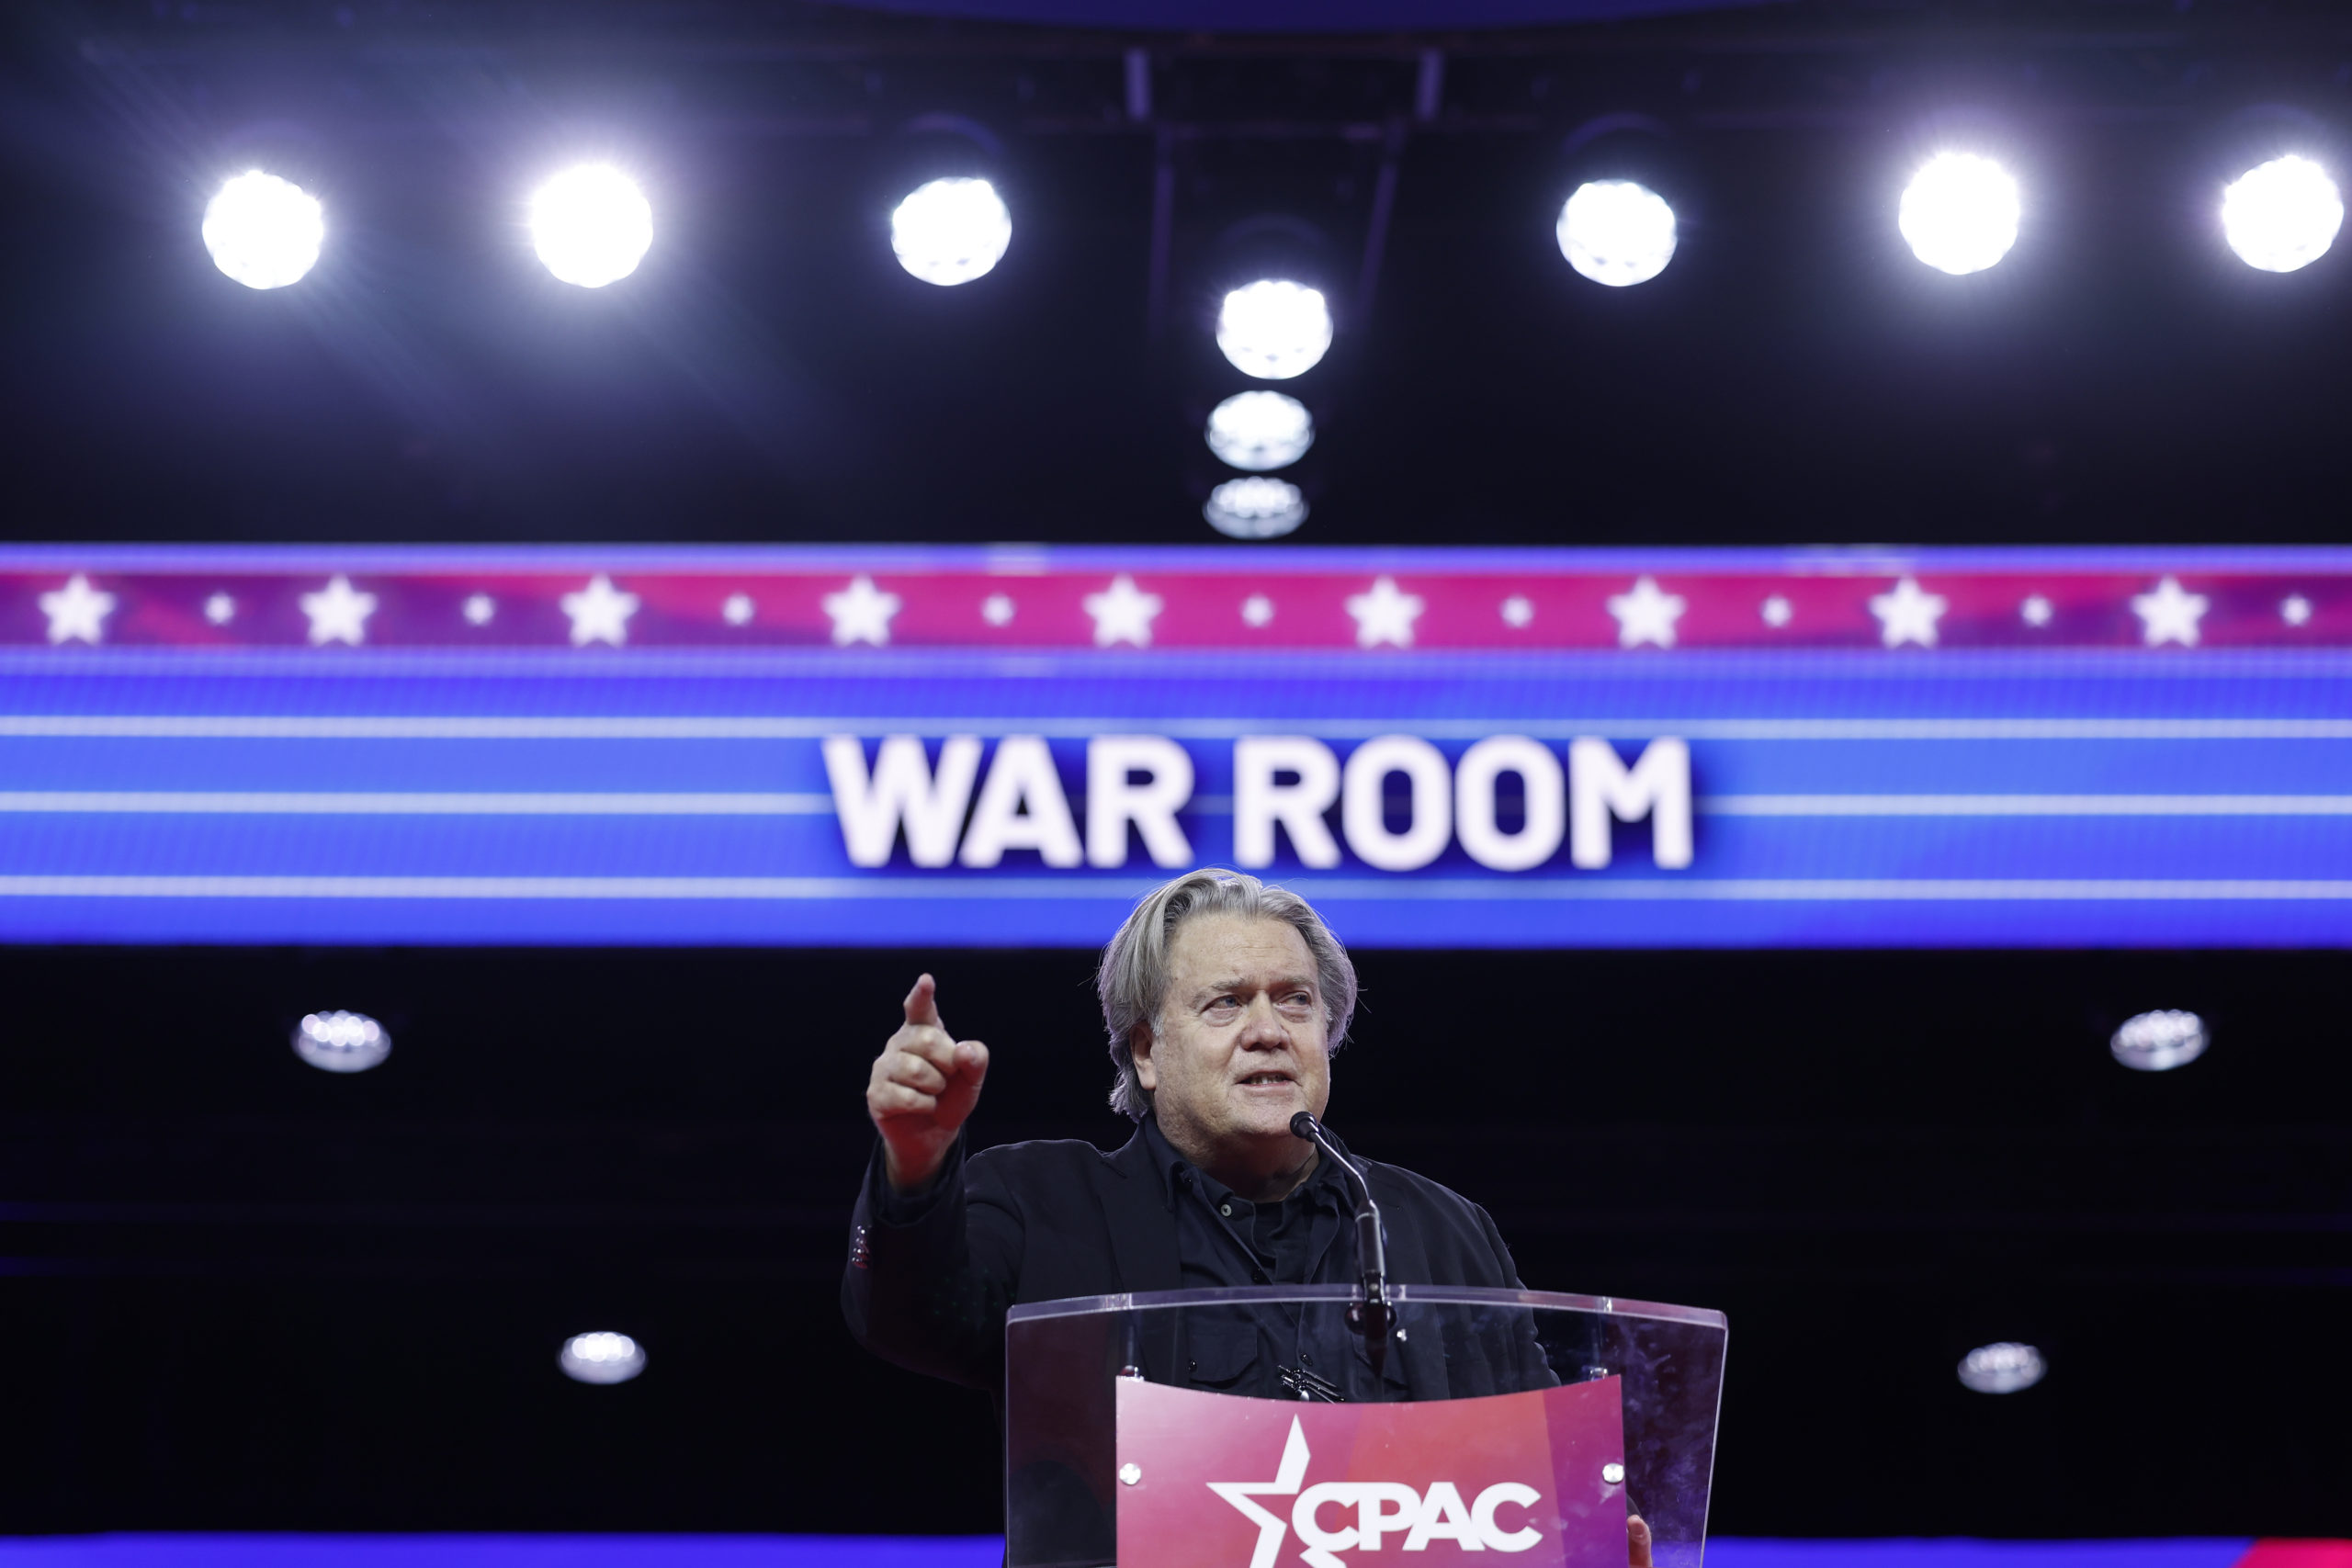 NATIONAL HARBOR, MARYLAND - MARCH 03: Former White House chief strategist for the Trump Administration Steve Bannon speaks during the annual Conservative Political Action Conference (CPAC) at the Gaylord National Resort Hotel And Convention Center on March 03, 2023 in National Harbor, Maryland. The annual conservative conference entered its second day of speakers including congressional members, media personalities and members of former President Donald Trump's administration. President Donald Trump will address the event on Saturday. (Photo by Anna Moneymaker/Getty Images)